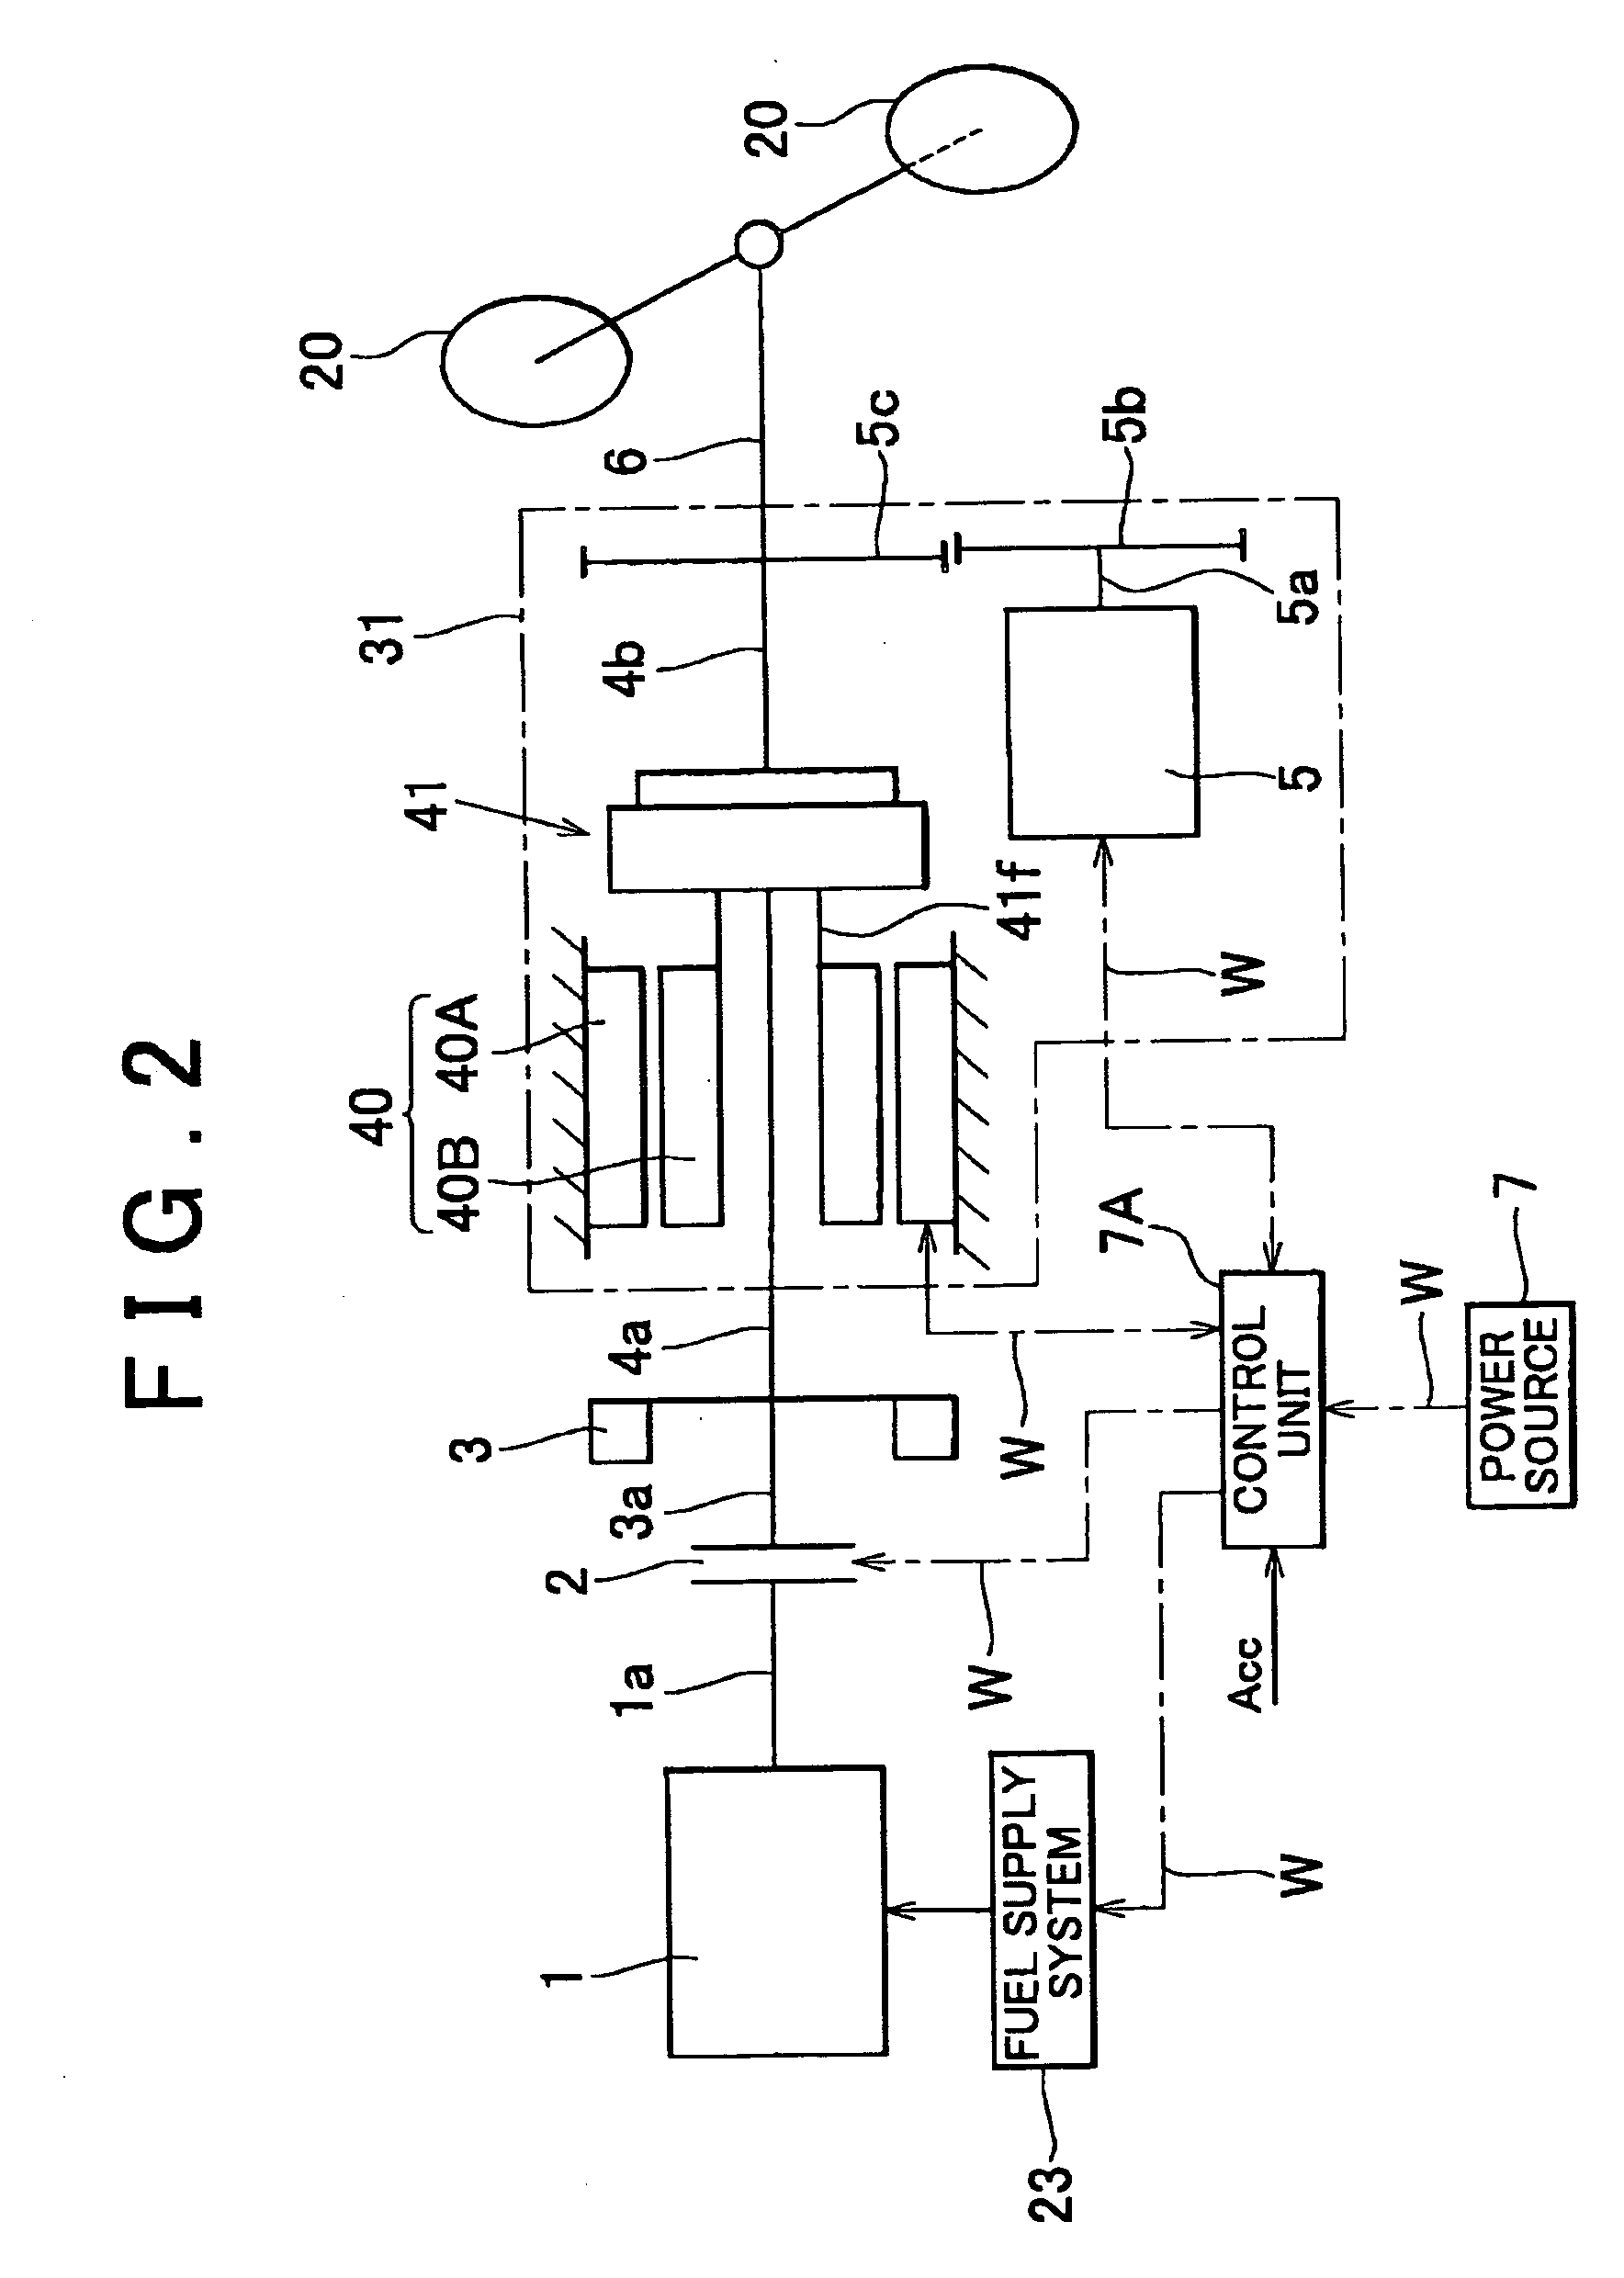 Method of controlling vehicle driving system